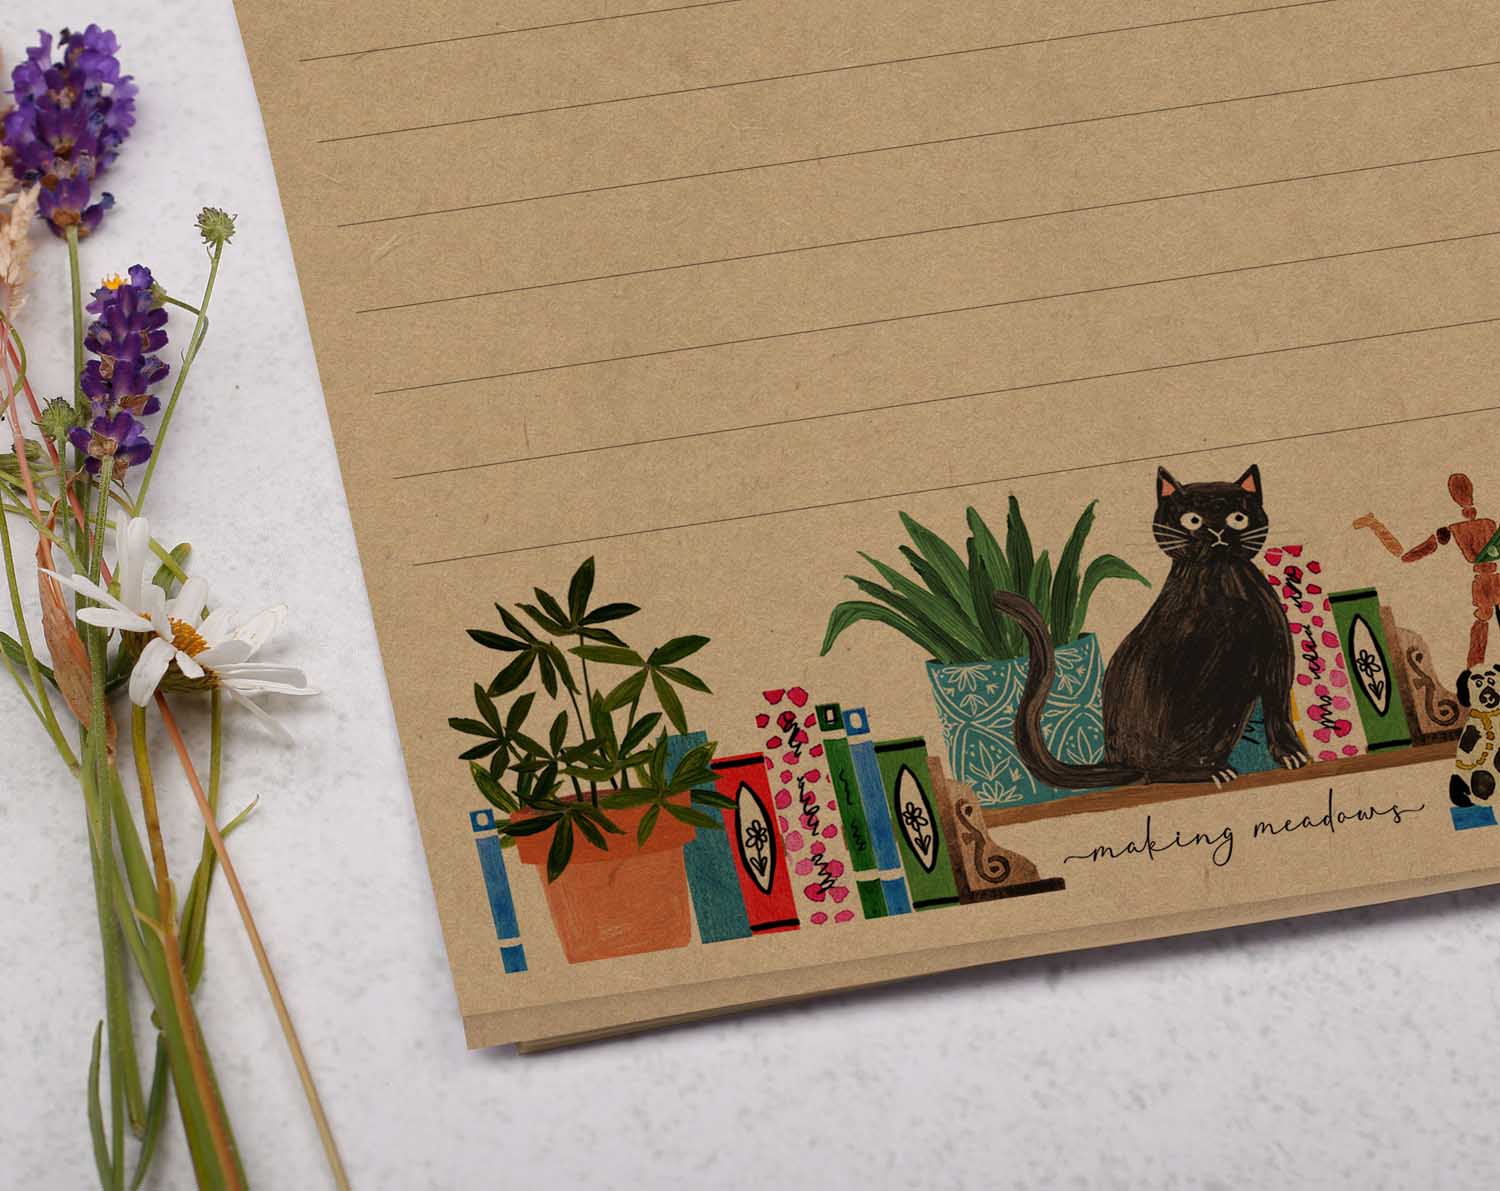 A5 Kraft letter writing paper sheets with books on bookshelf and a cat design.